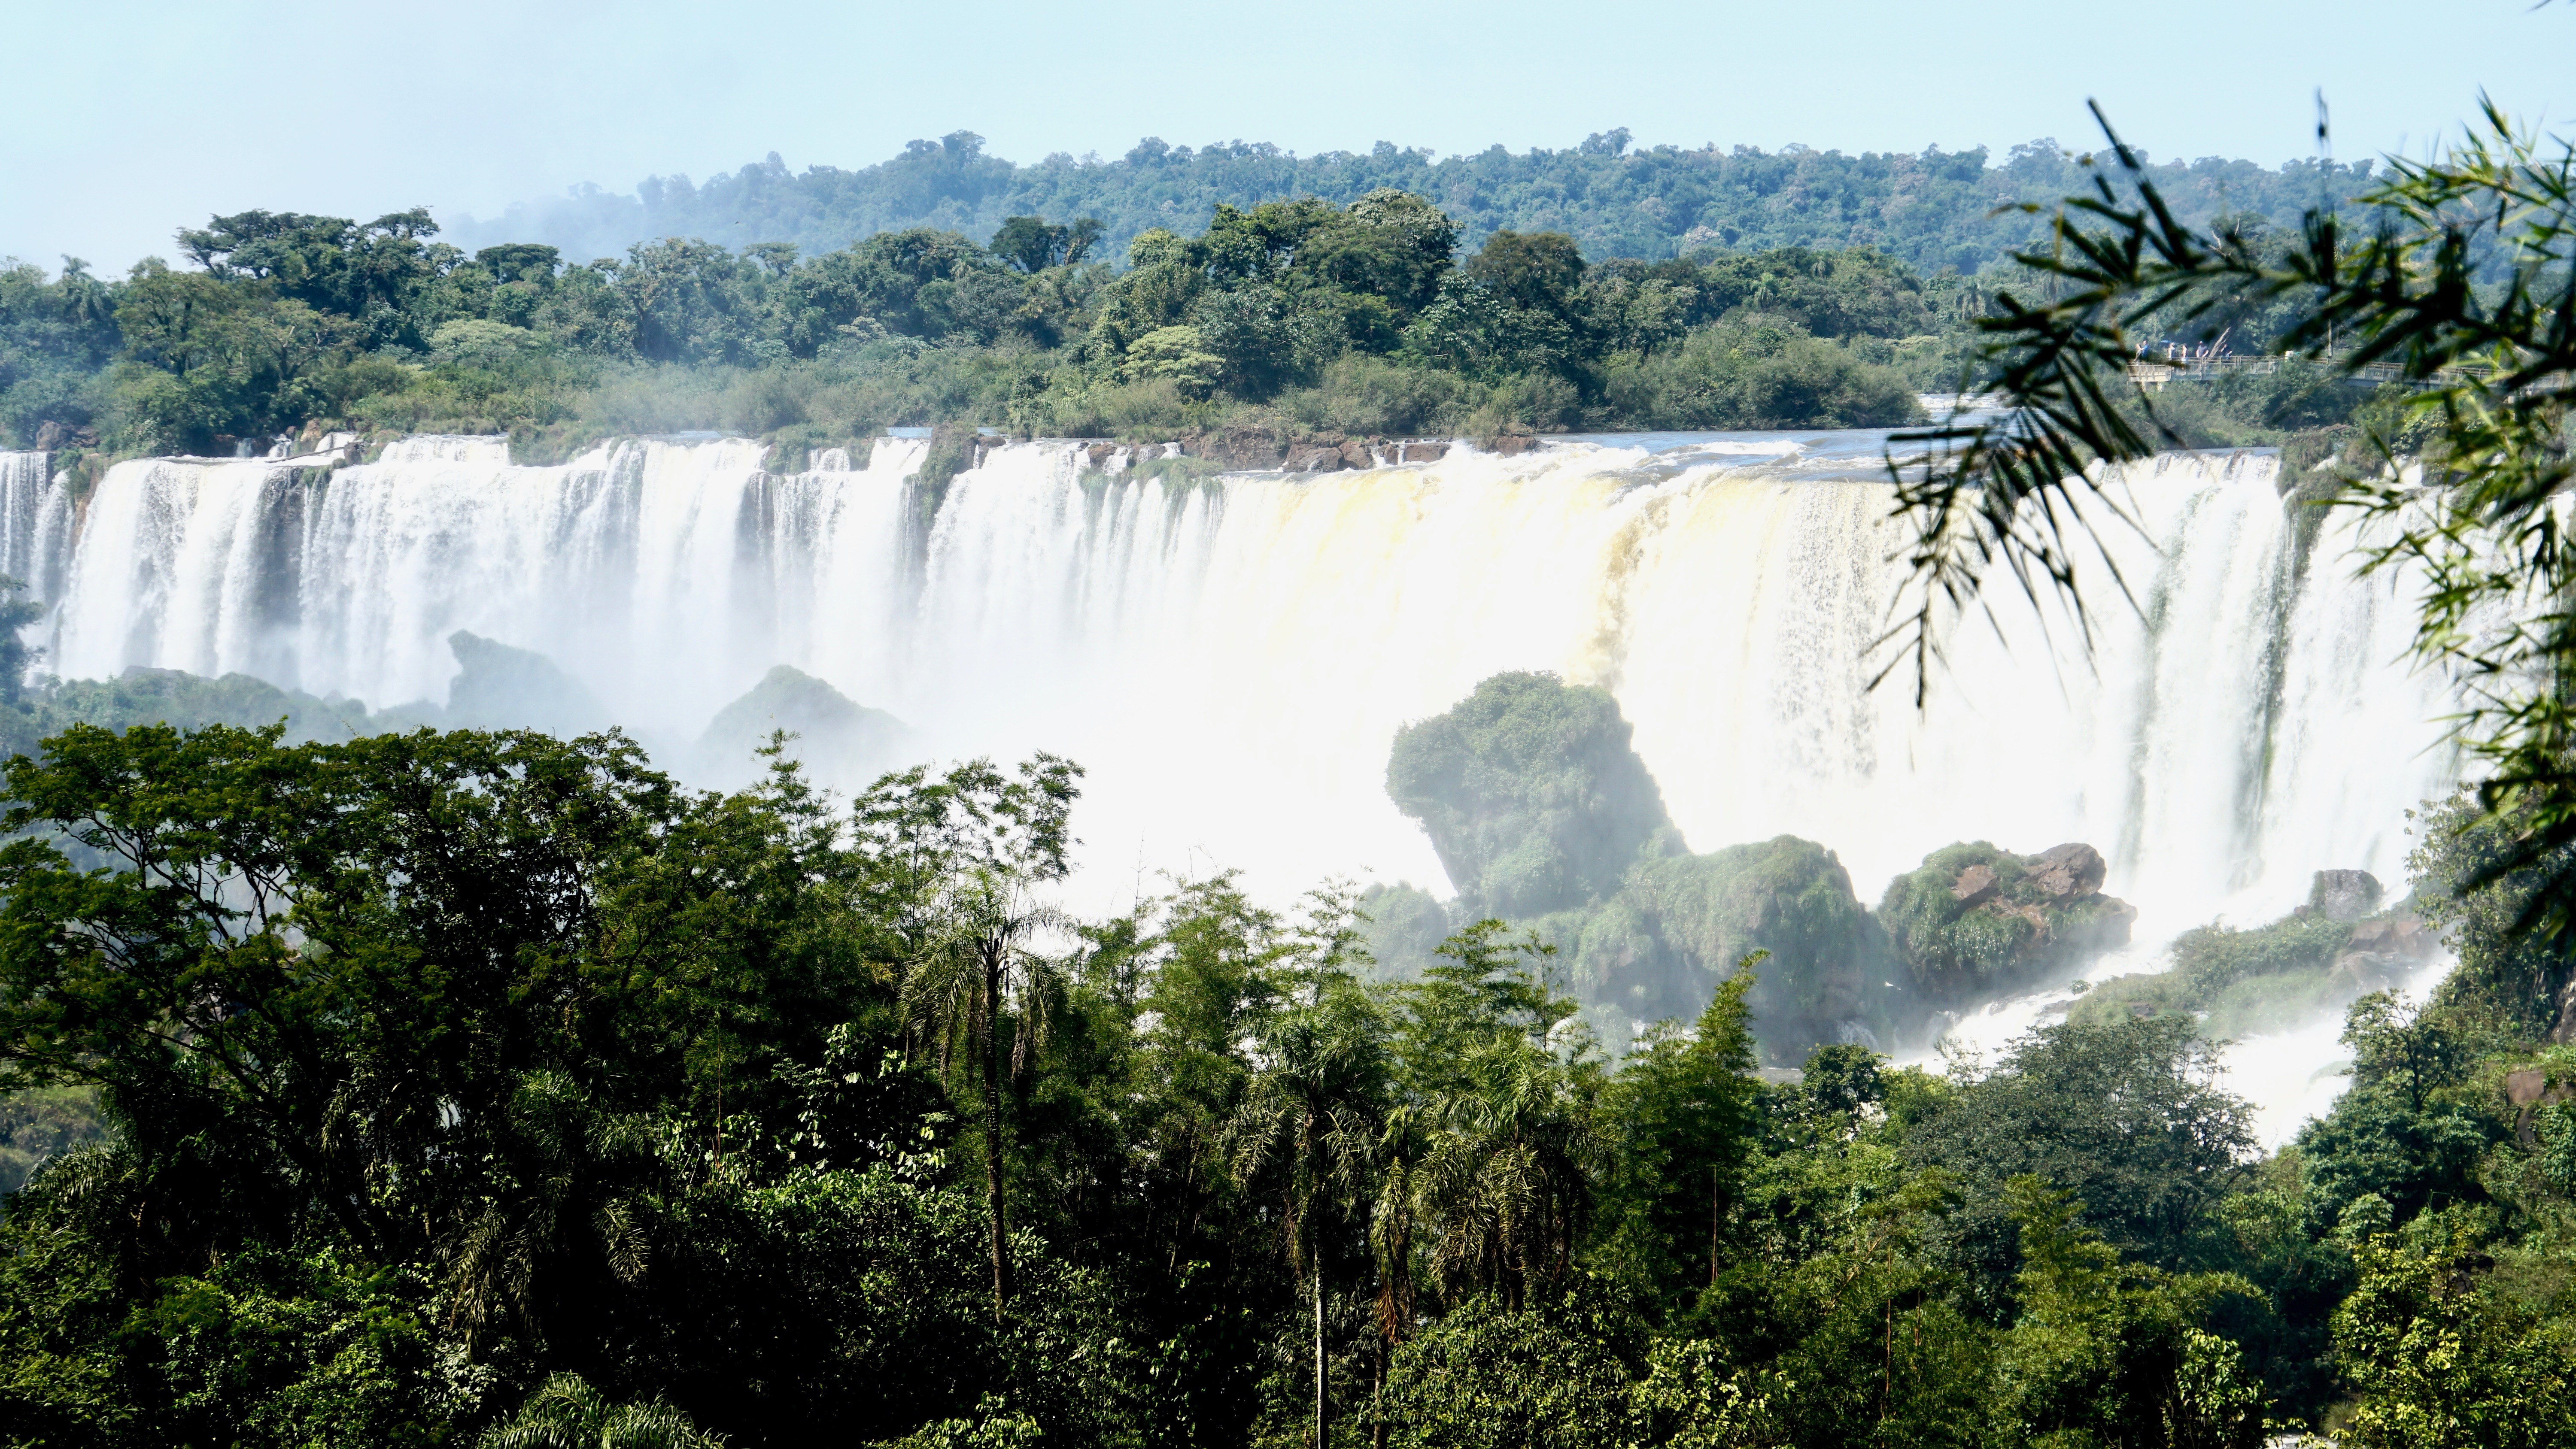 Getting soaked at Iguazú Falls…the Argentinian side